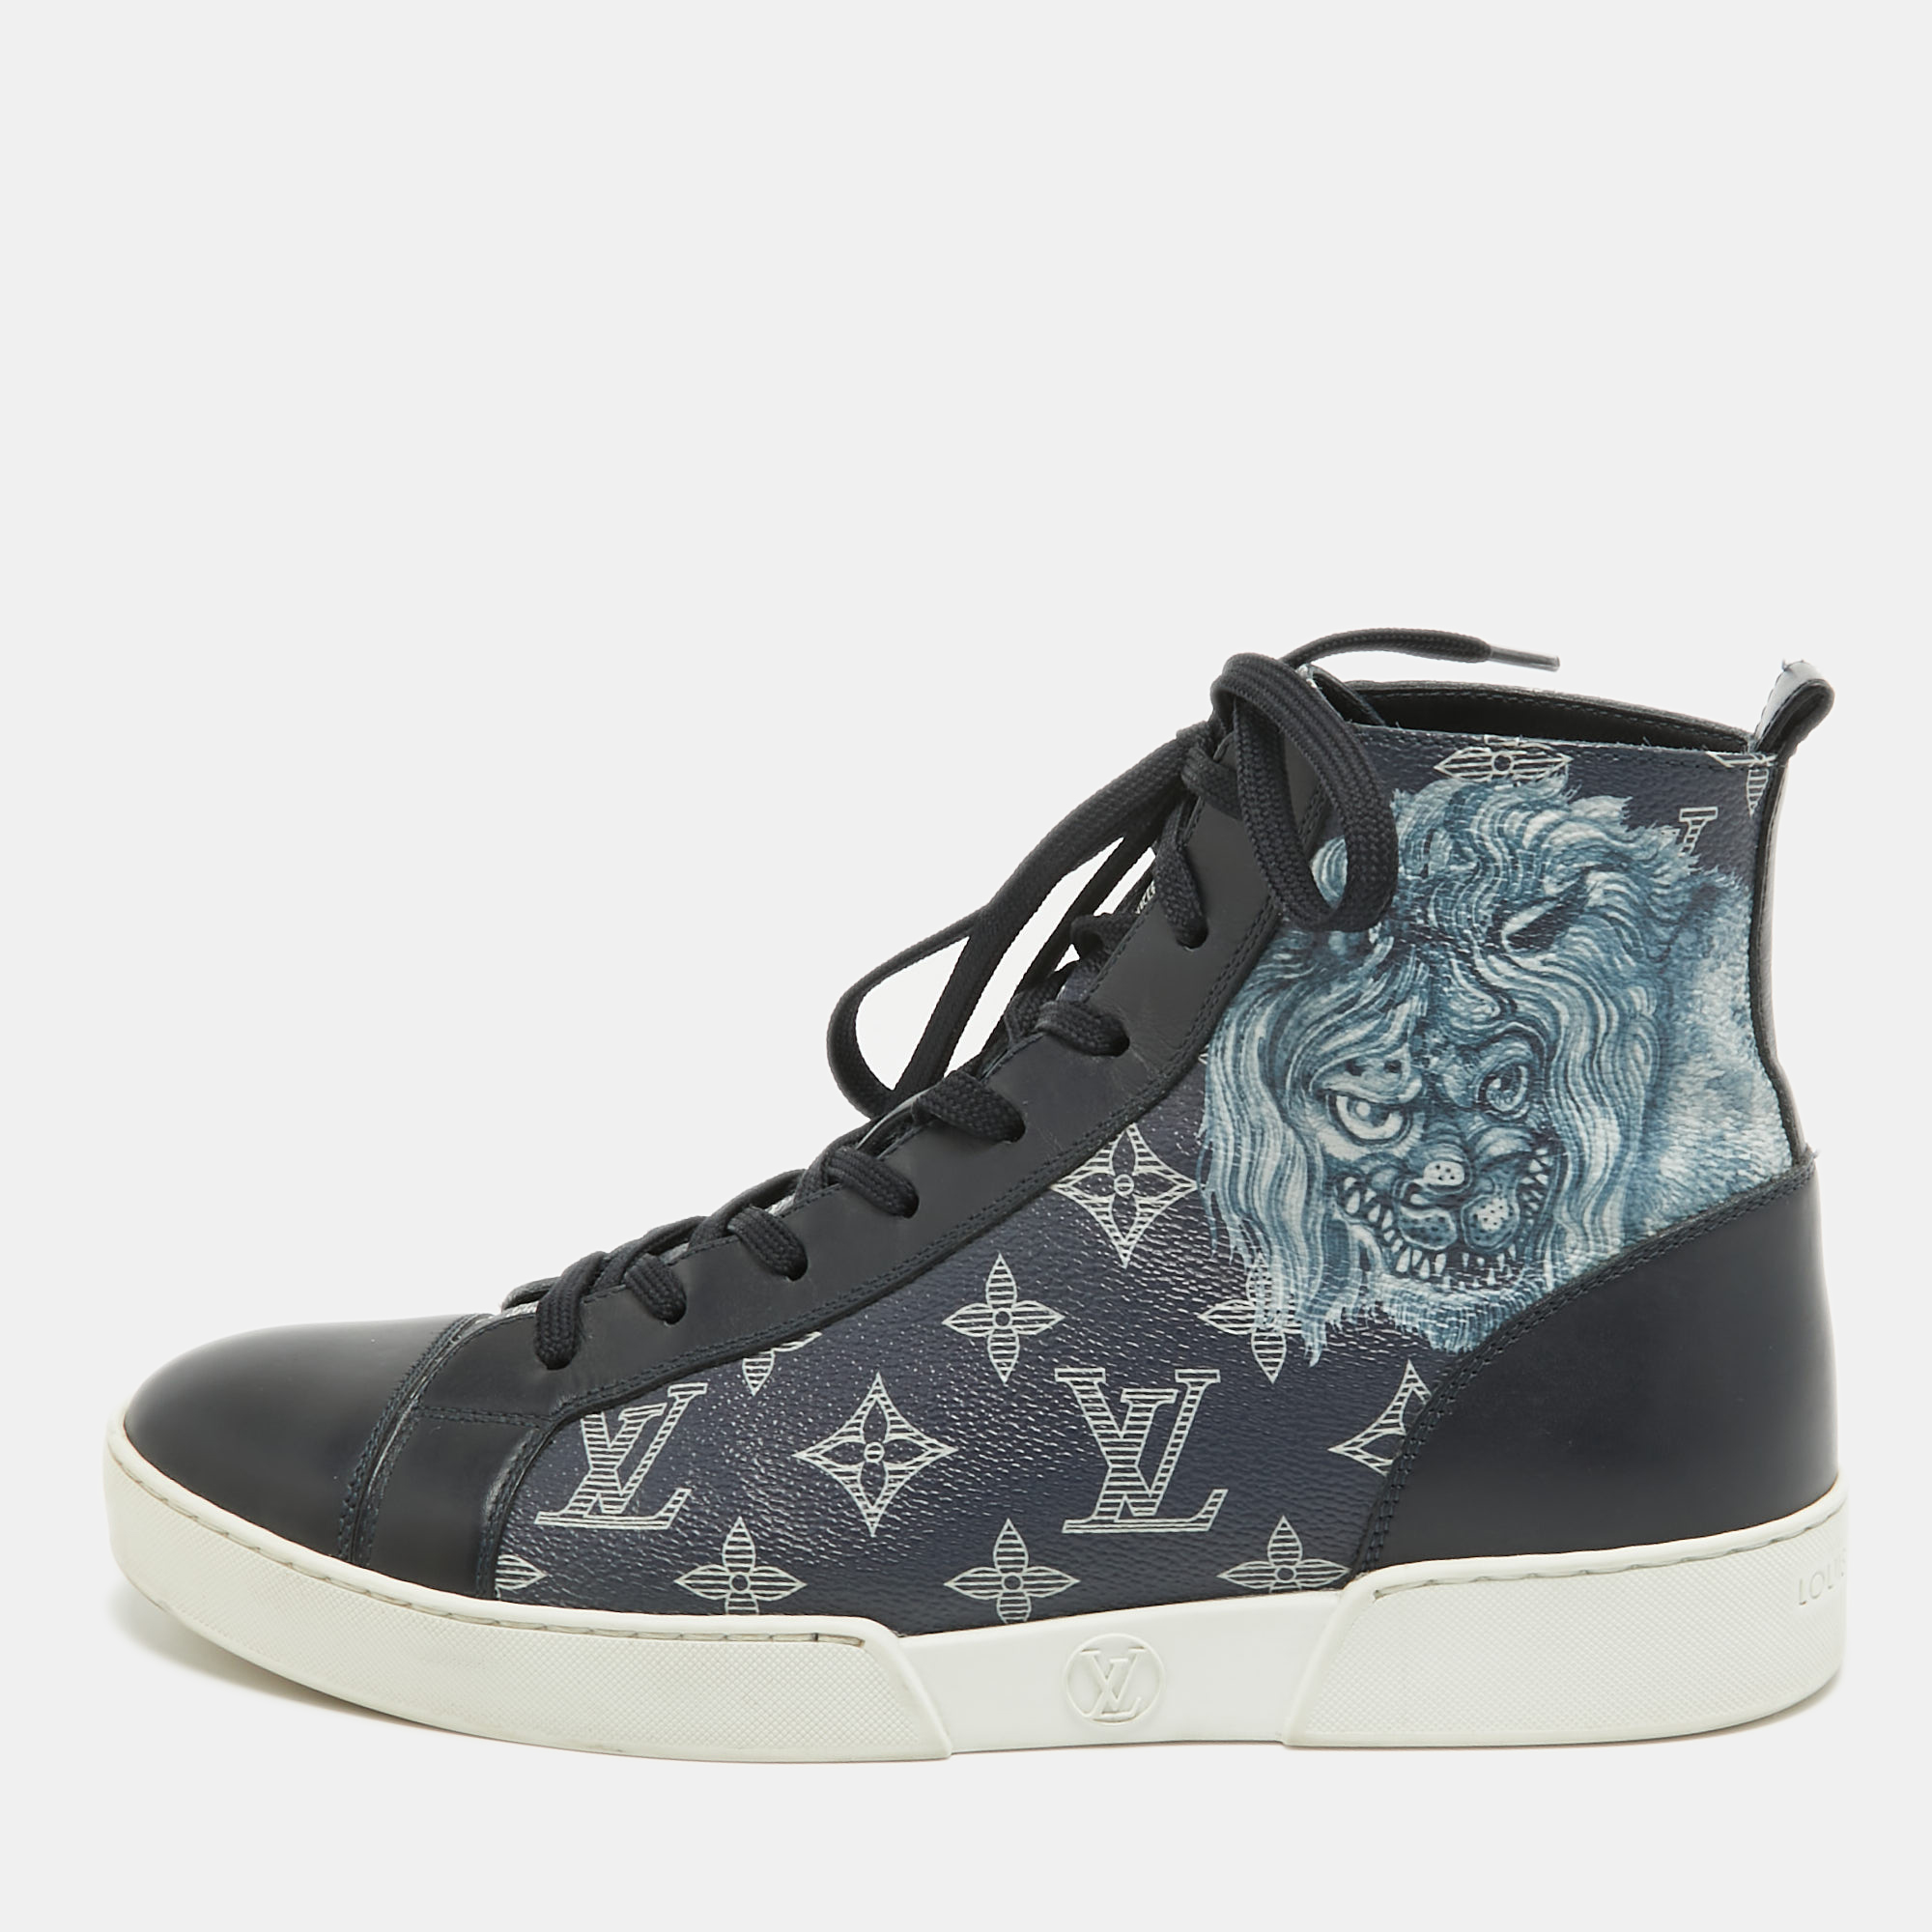 Pre-owned Louis Vuitton Louise Vuitton Navy Blue Canvas And Leather Match Up Cloth Trainer High Top Sneakers Size 40